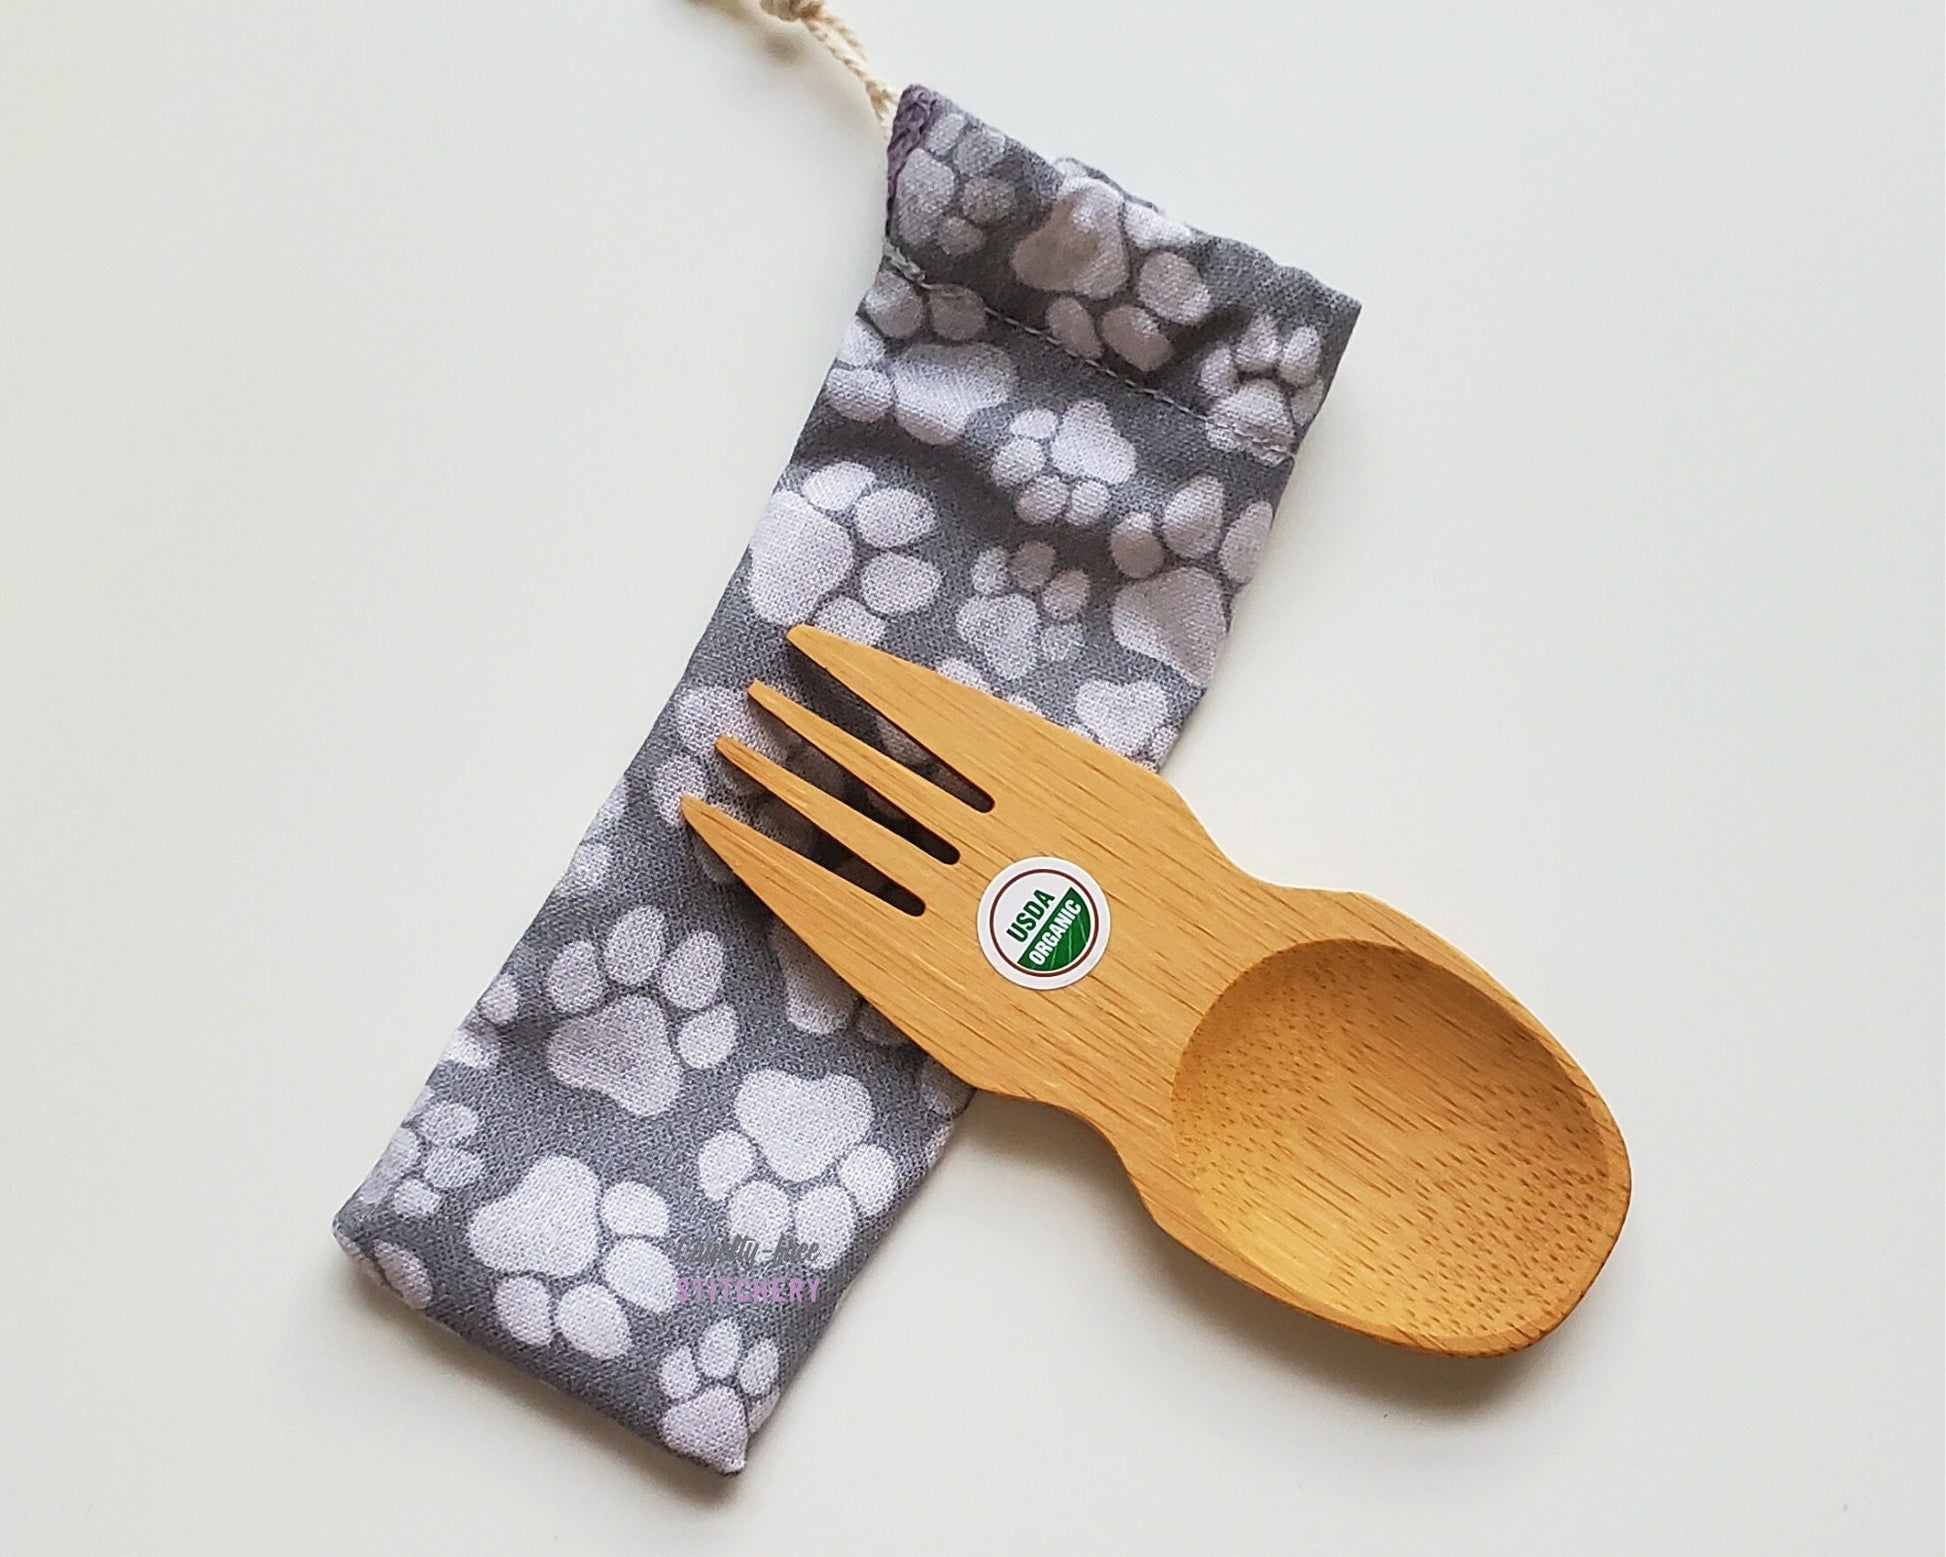 Reusable bamboo spork with pouch. The pouch is a grey fabric with various sizes of faded white paw prints. The pouch is sitting diagonally with the spork partially on top pointing the other way. The spork is small, a double ended fork and spoon.